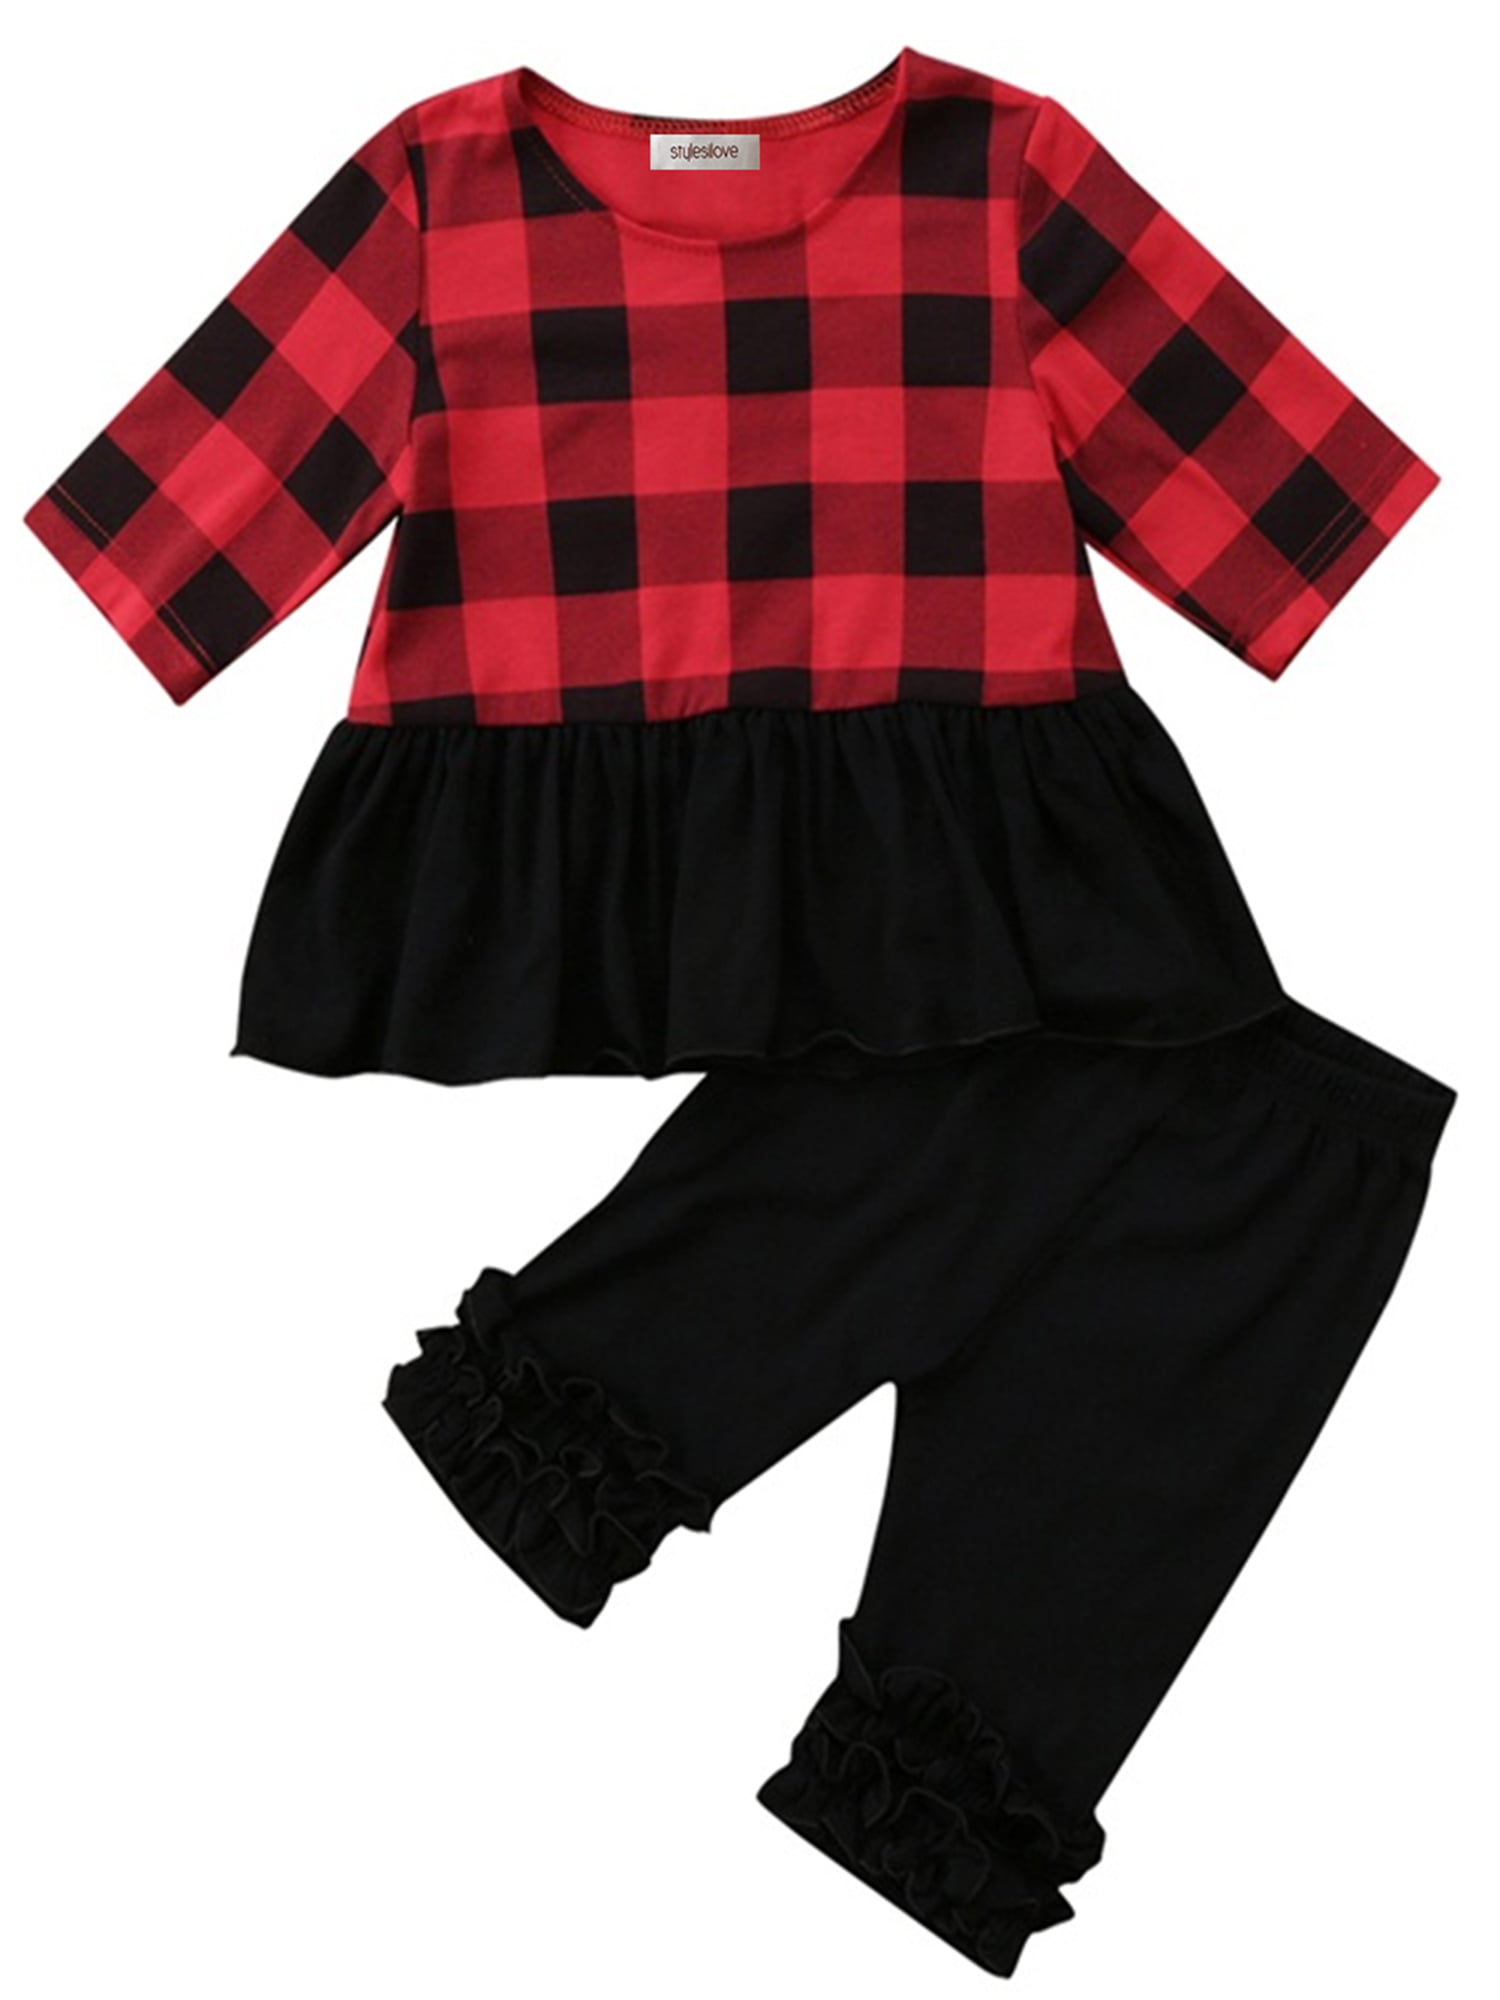 StylesILove - stylesilove Baby Toddler Girl Black and Red Plaid Jersey ...